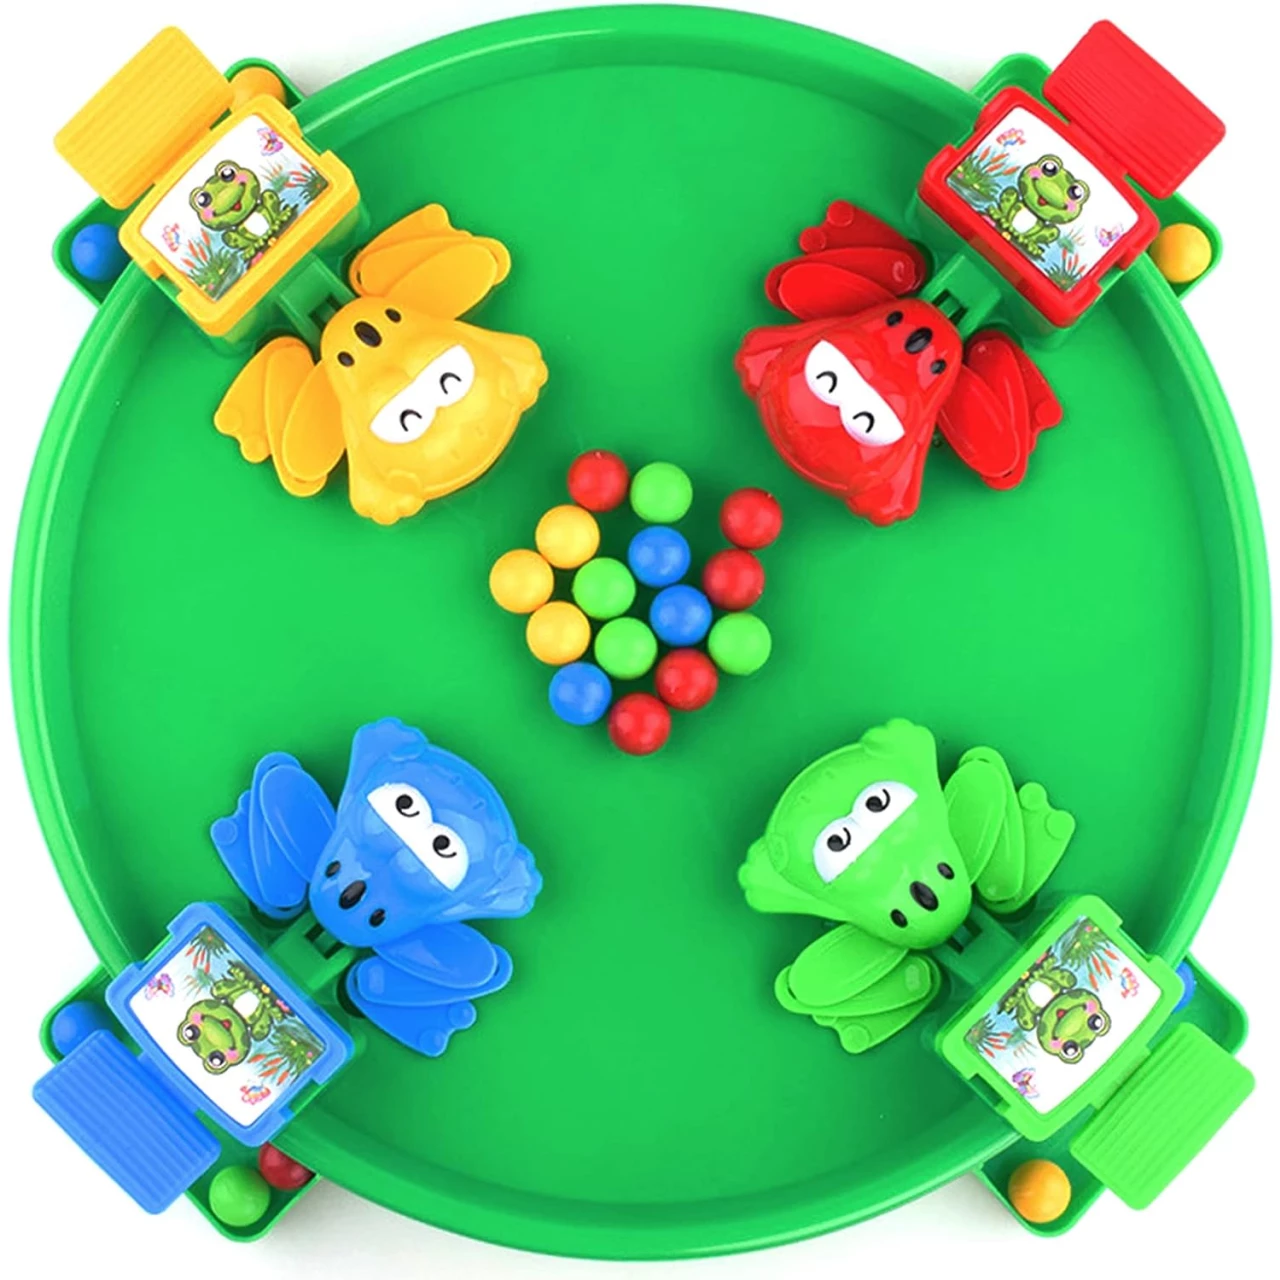 Hungry Frogs Board Game – Intense Game of Quick Reflexes – Pre-School Game for Ages 3 and Up; for 2 to 4 Players